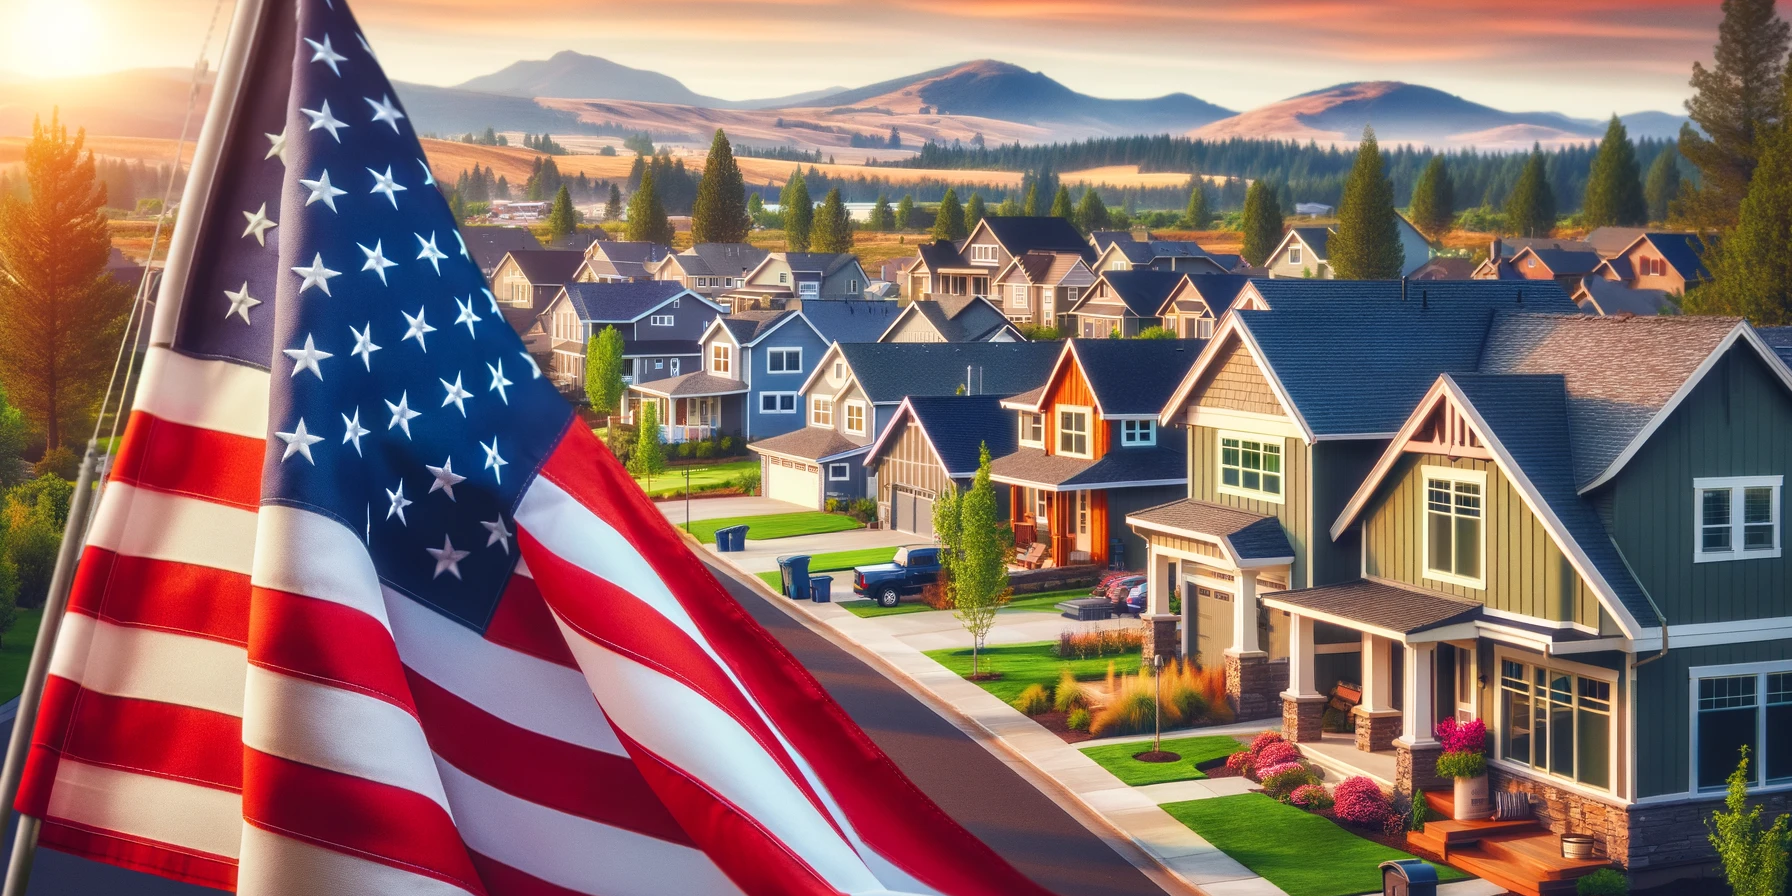 American flag and Southern Oregon neighborhood representing veterans' homeownership opportunities through VA loans on Veterans Day.